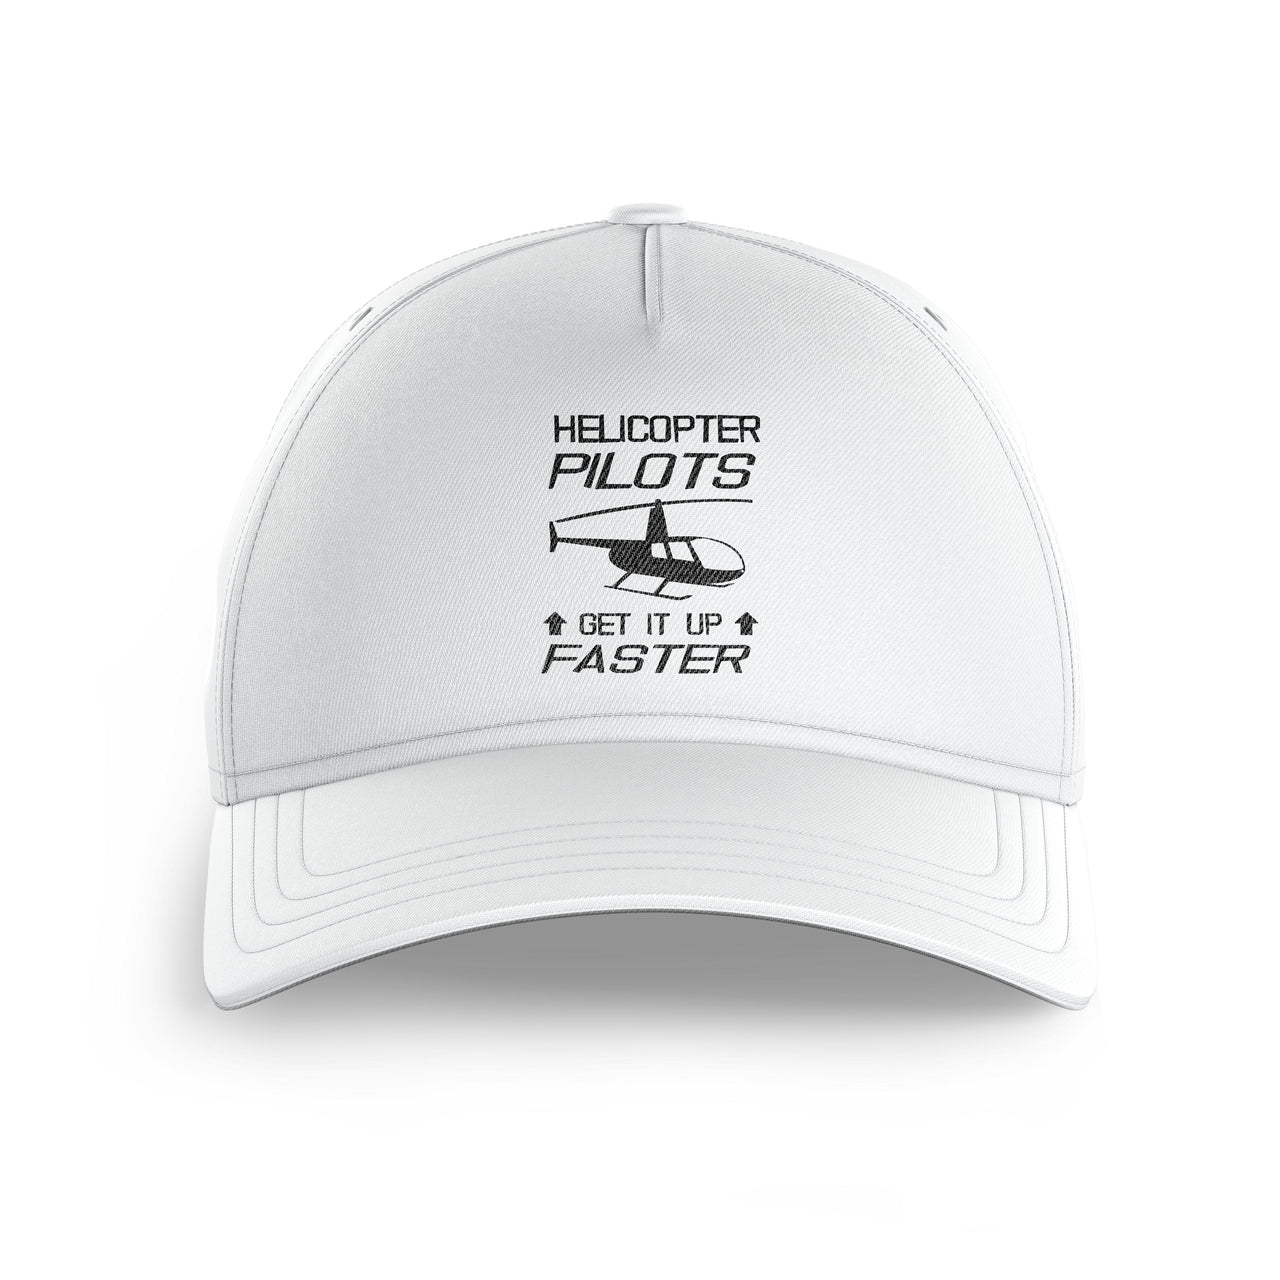 Helicopter Pilots Get It Up Faster Printed Hats